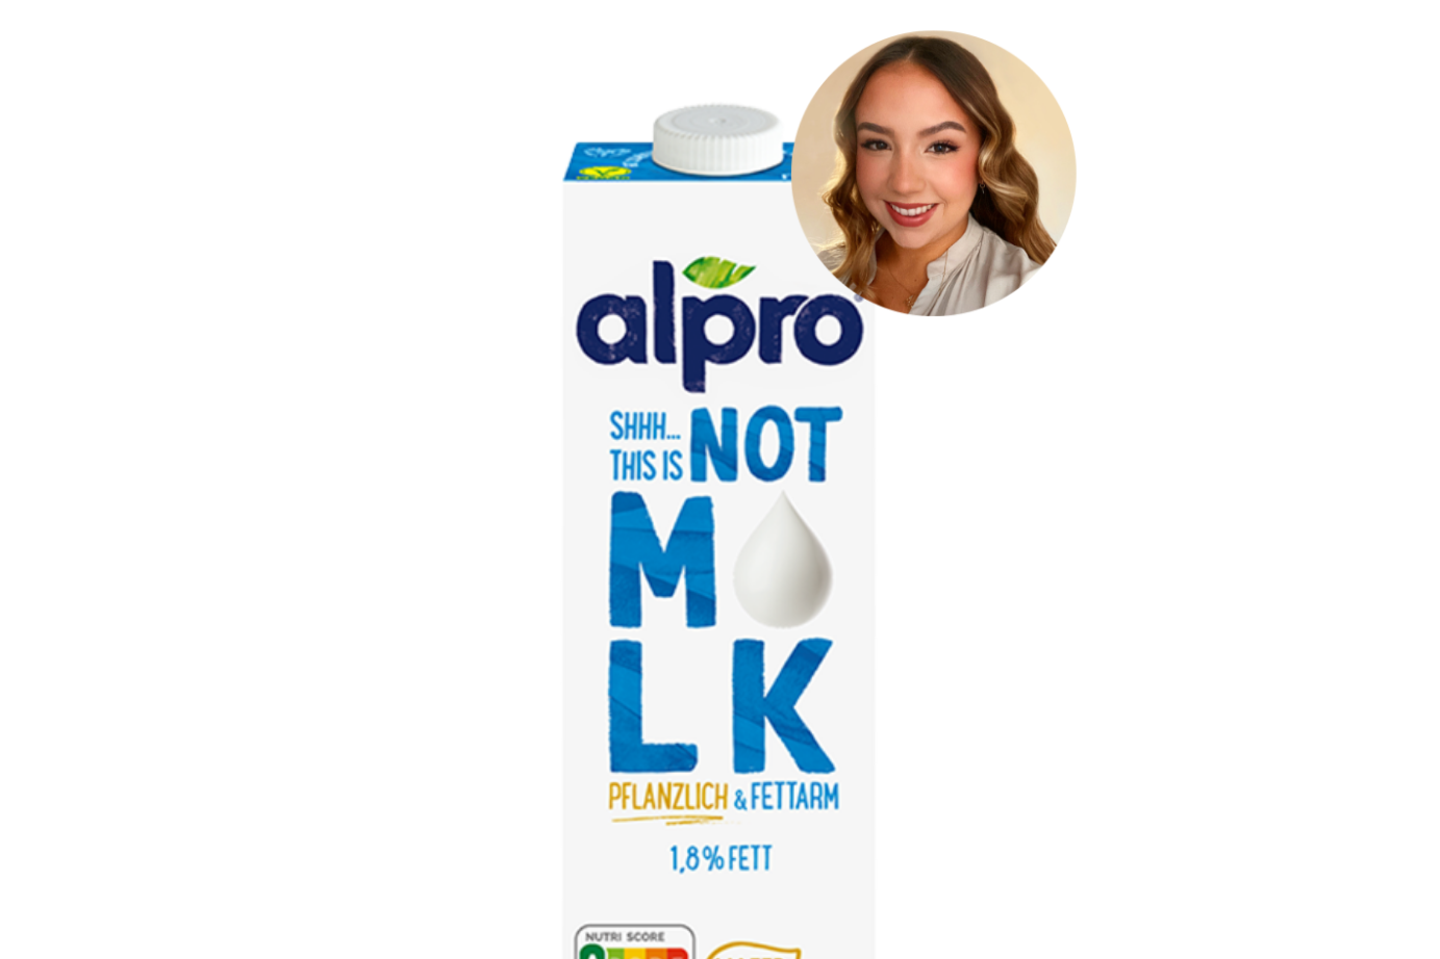 We Try: Alpro This is not Milk Test